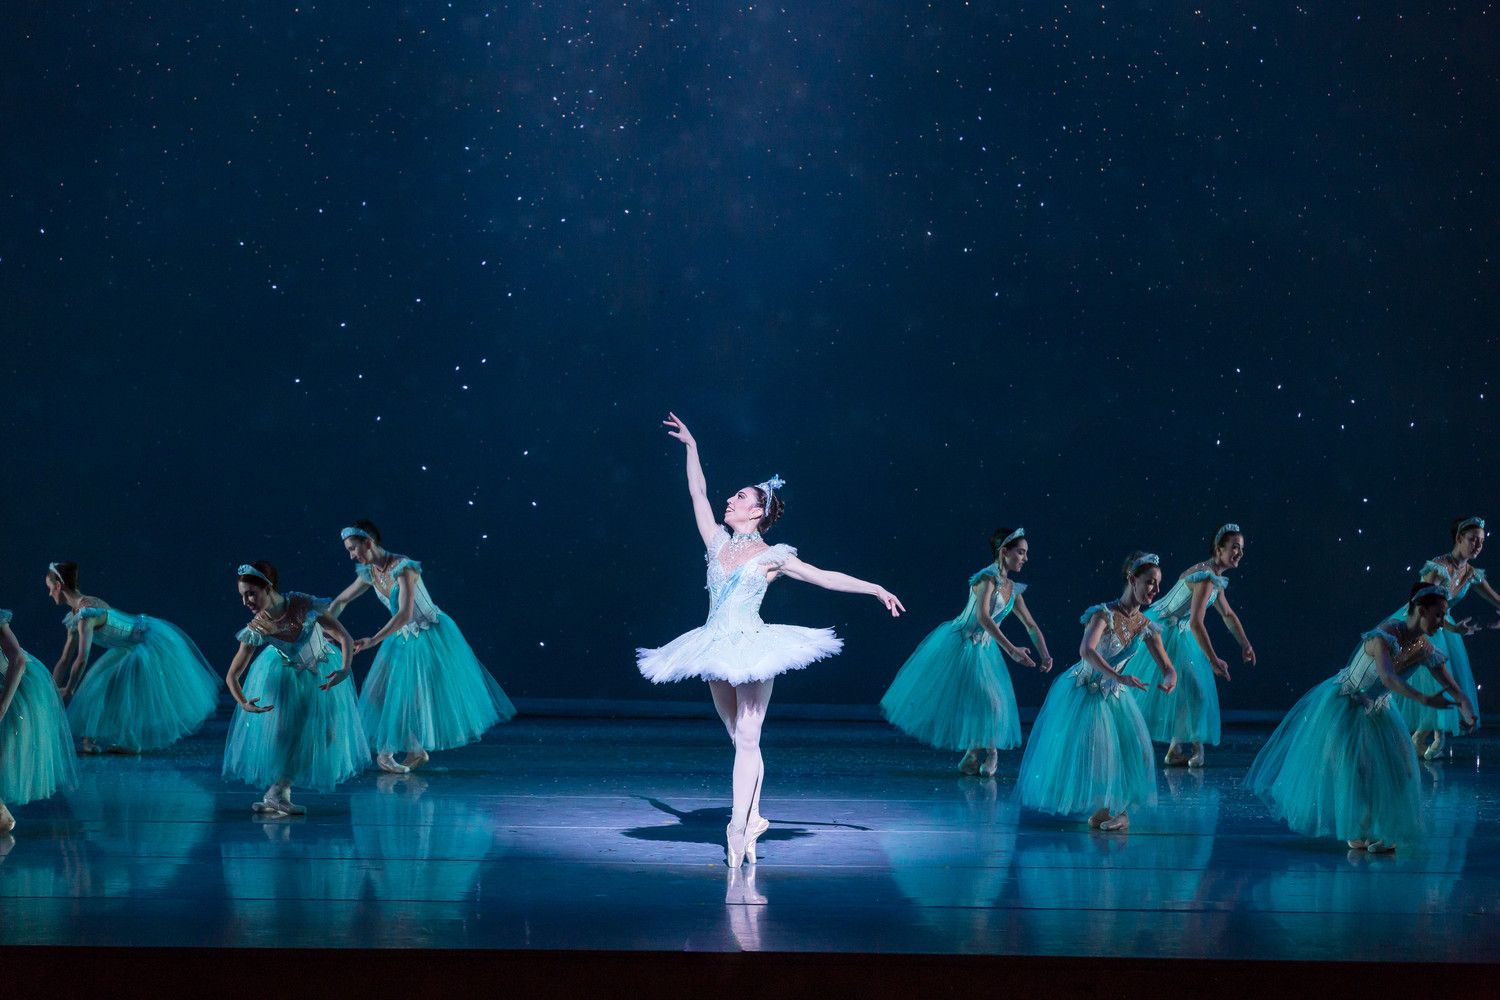 Rockville Centre native Katie Vasilopoulos has played many roles in the Nashville Ballet’s production of “The Nutcracker,” including the Snow Queen, above, and will step into the role of the Sugar Plum Fairy this week for the first time since high school.